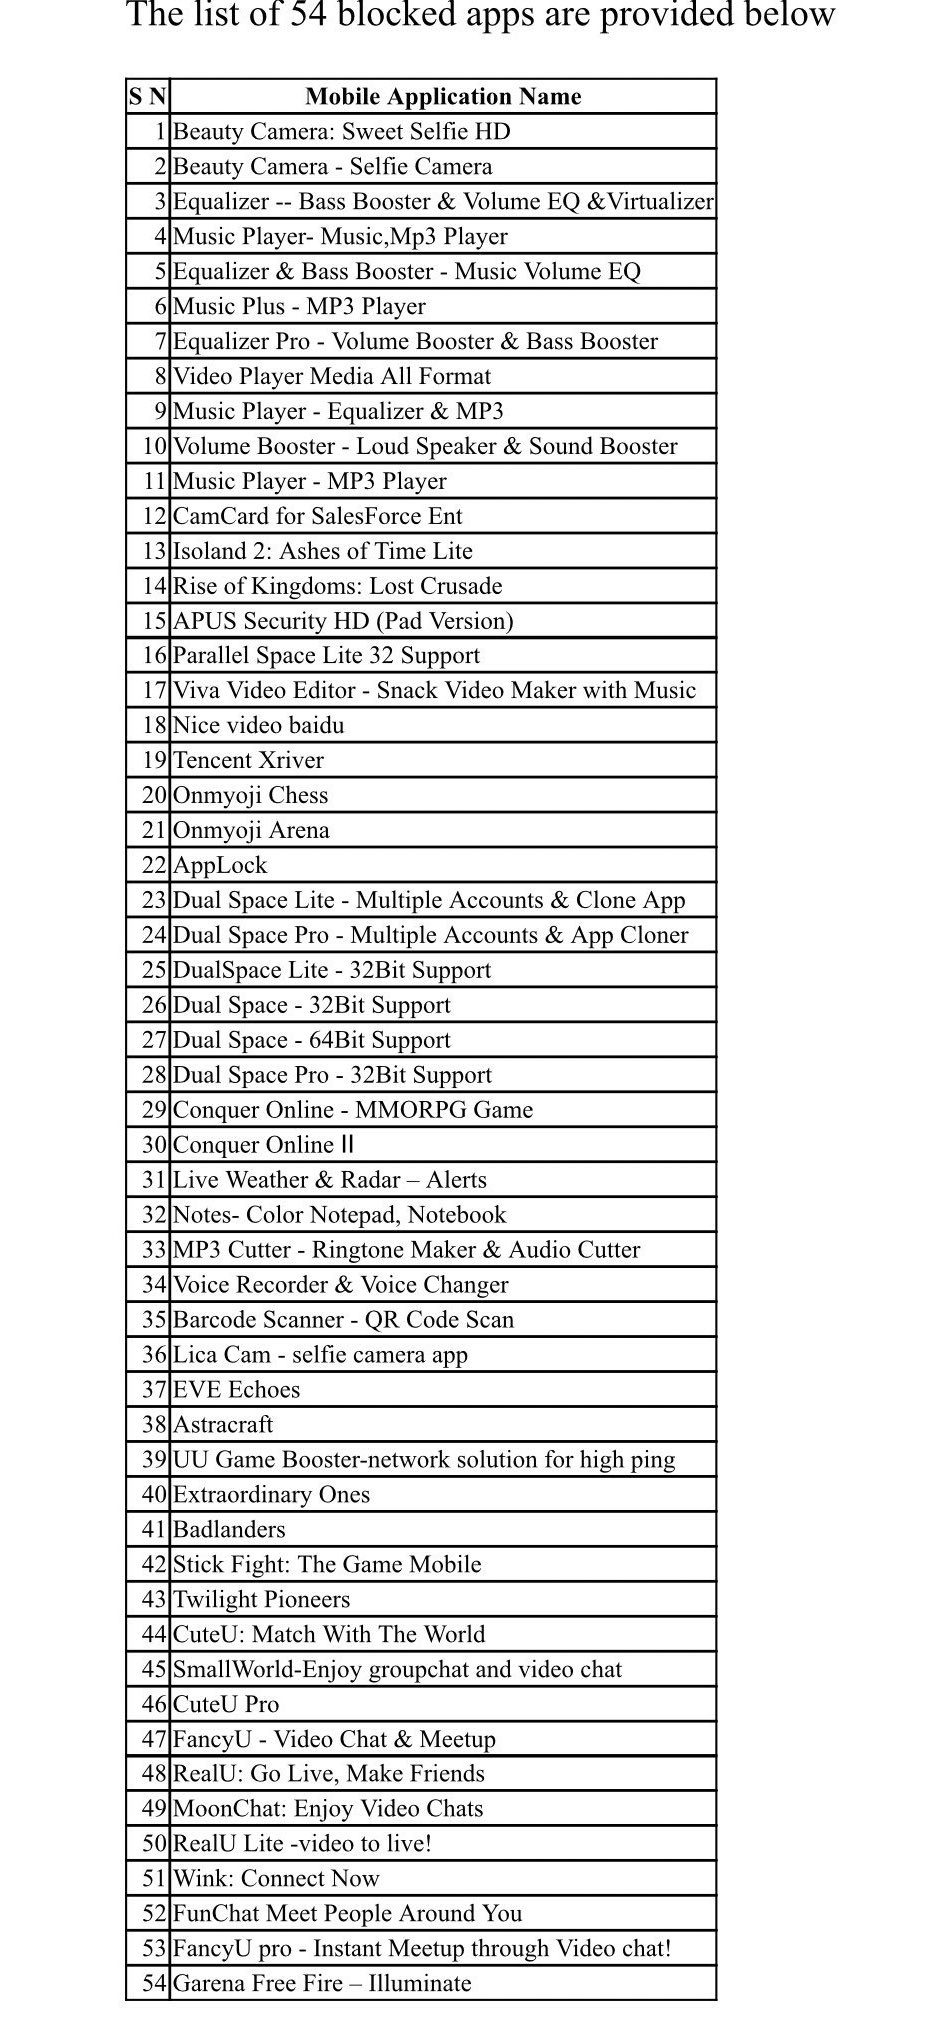 List of 54 Chinese Apps Banned by Ministry of IT.